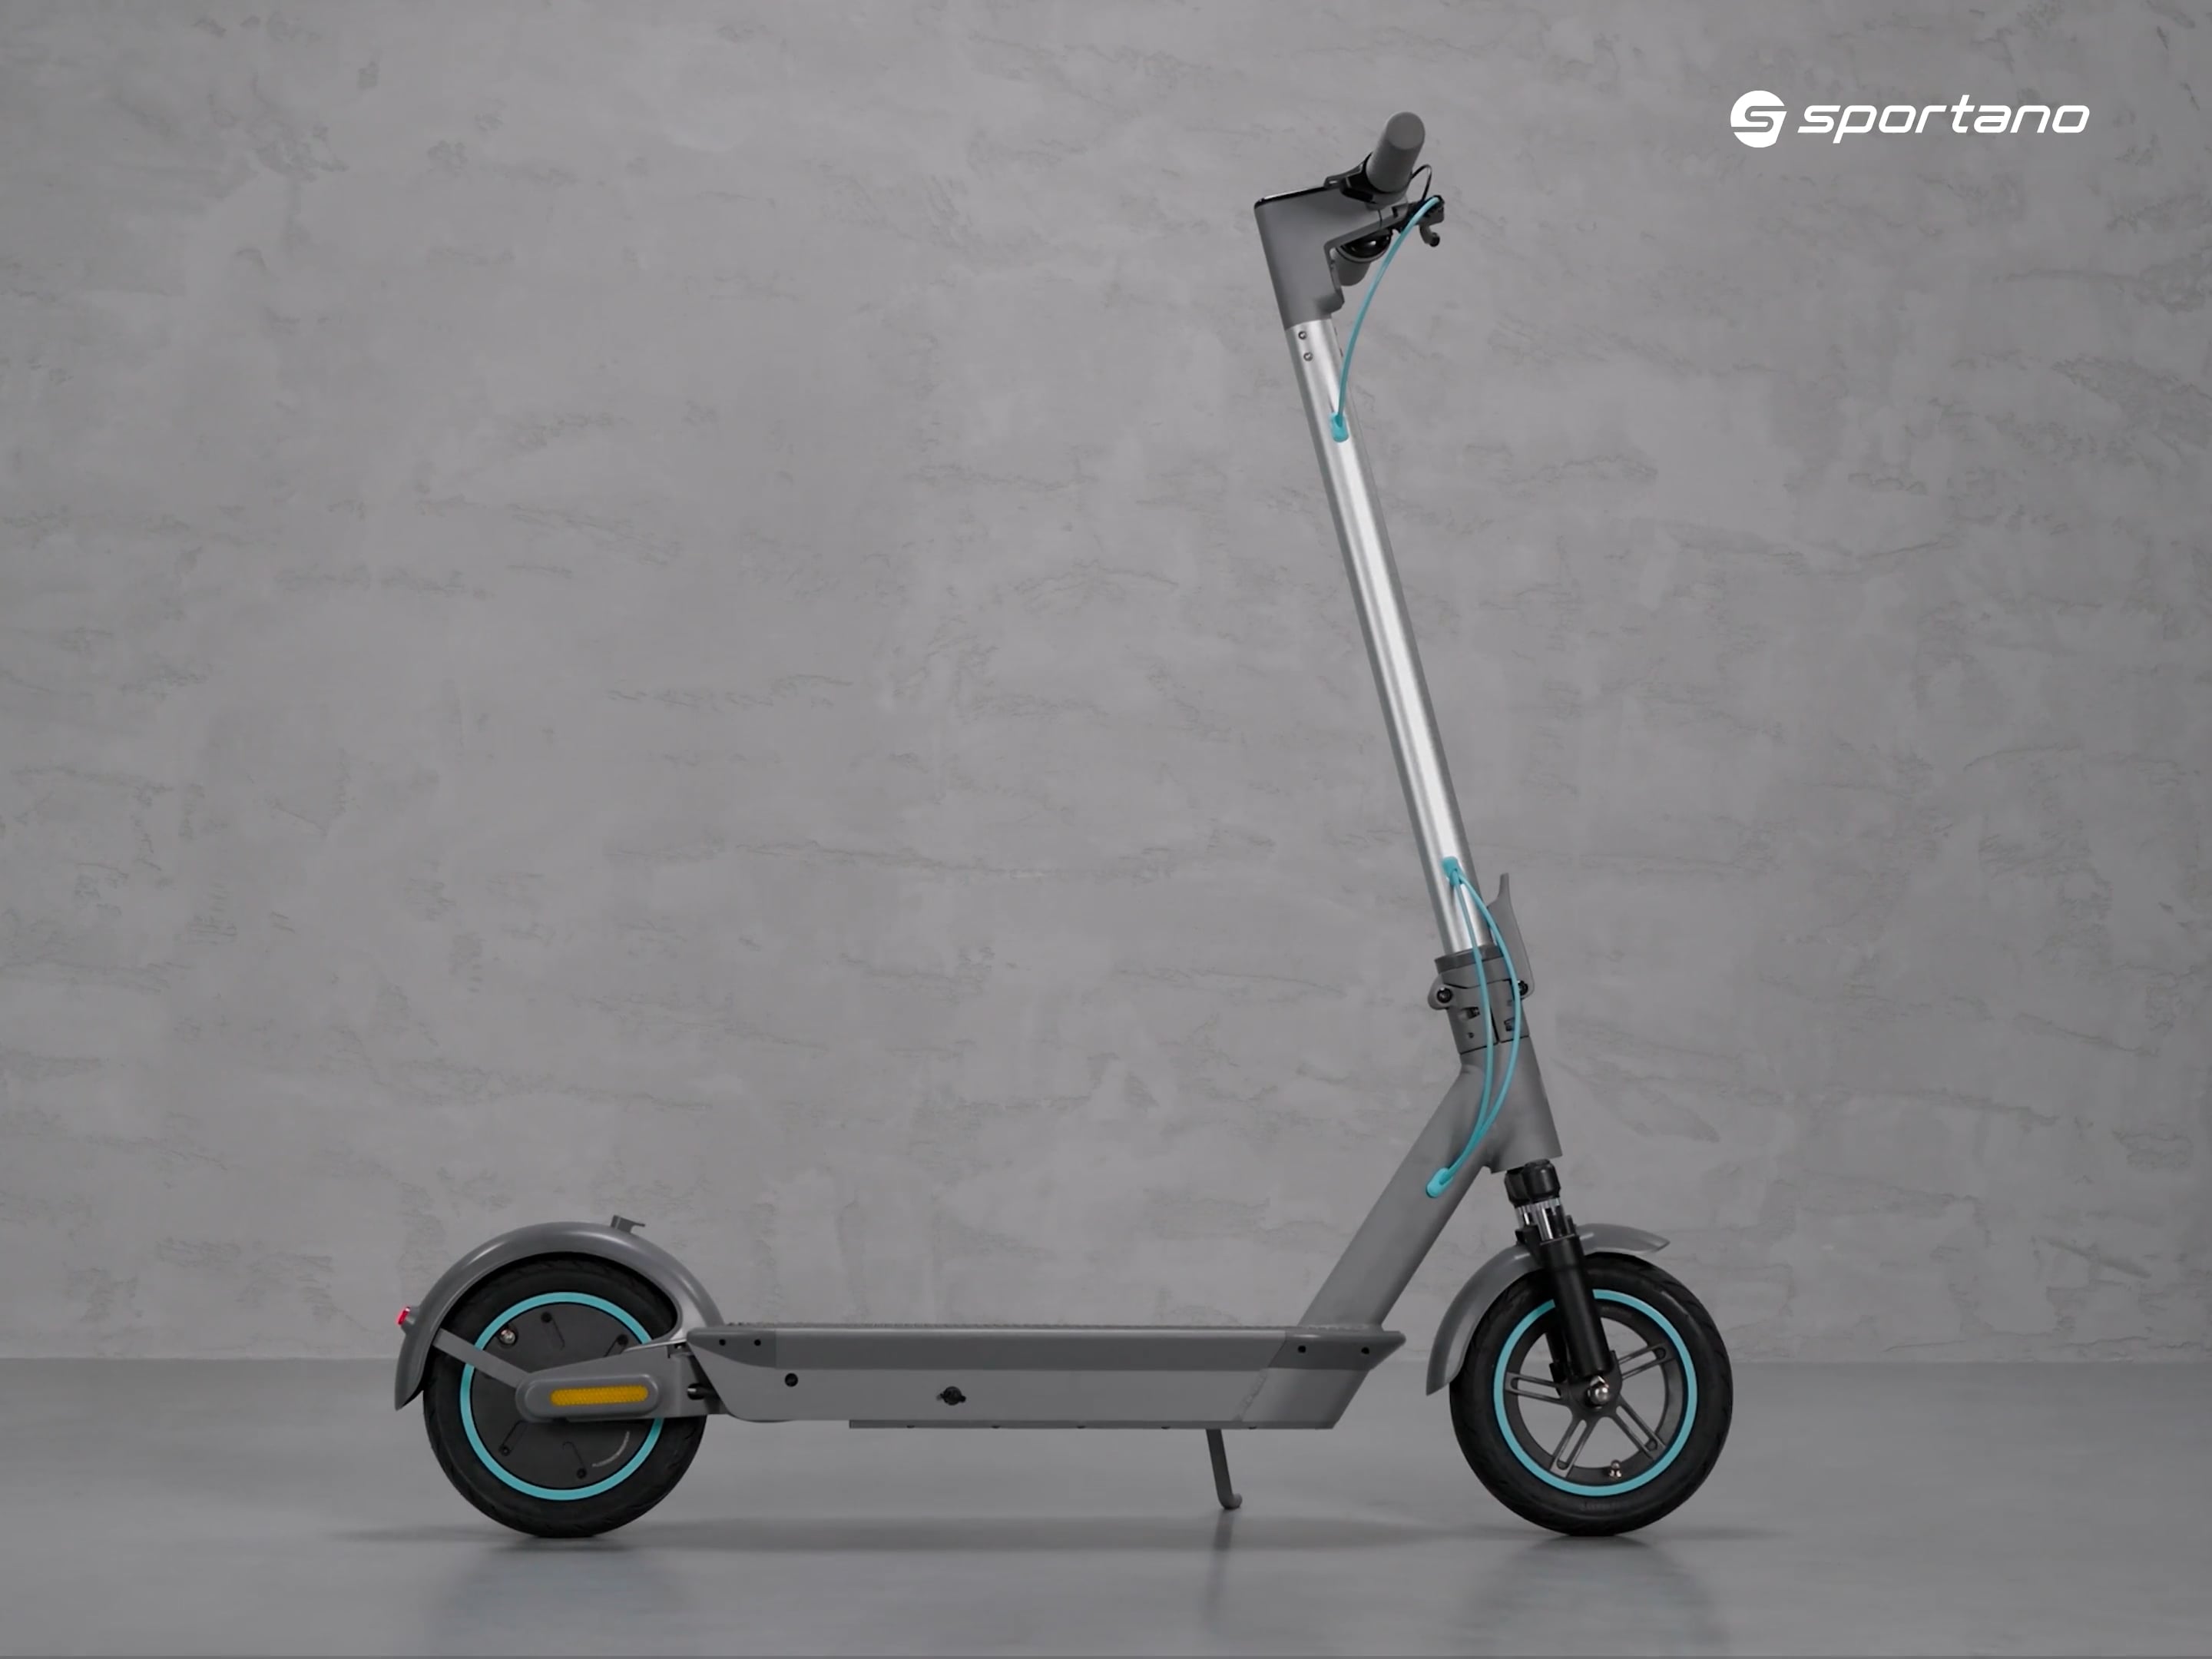 Motus Scooty 10 plus 2022 silver electric scooter